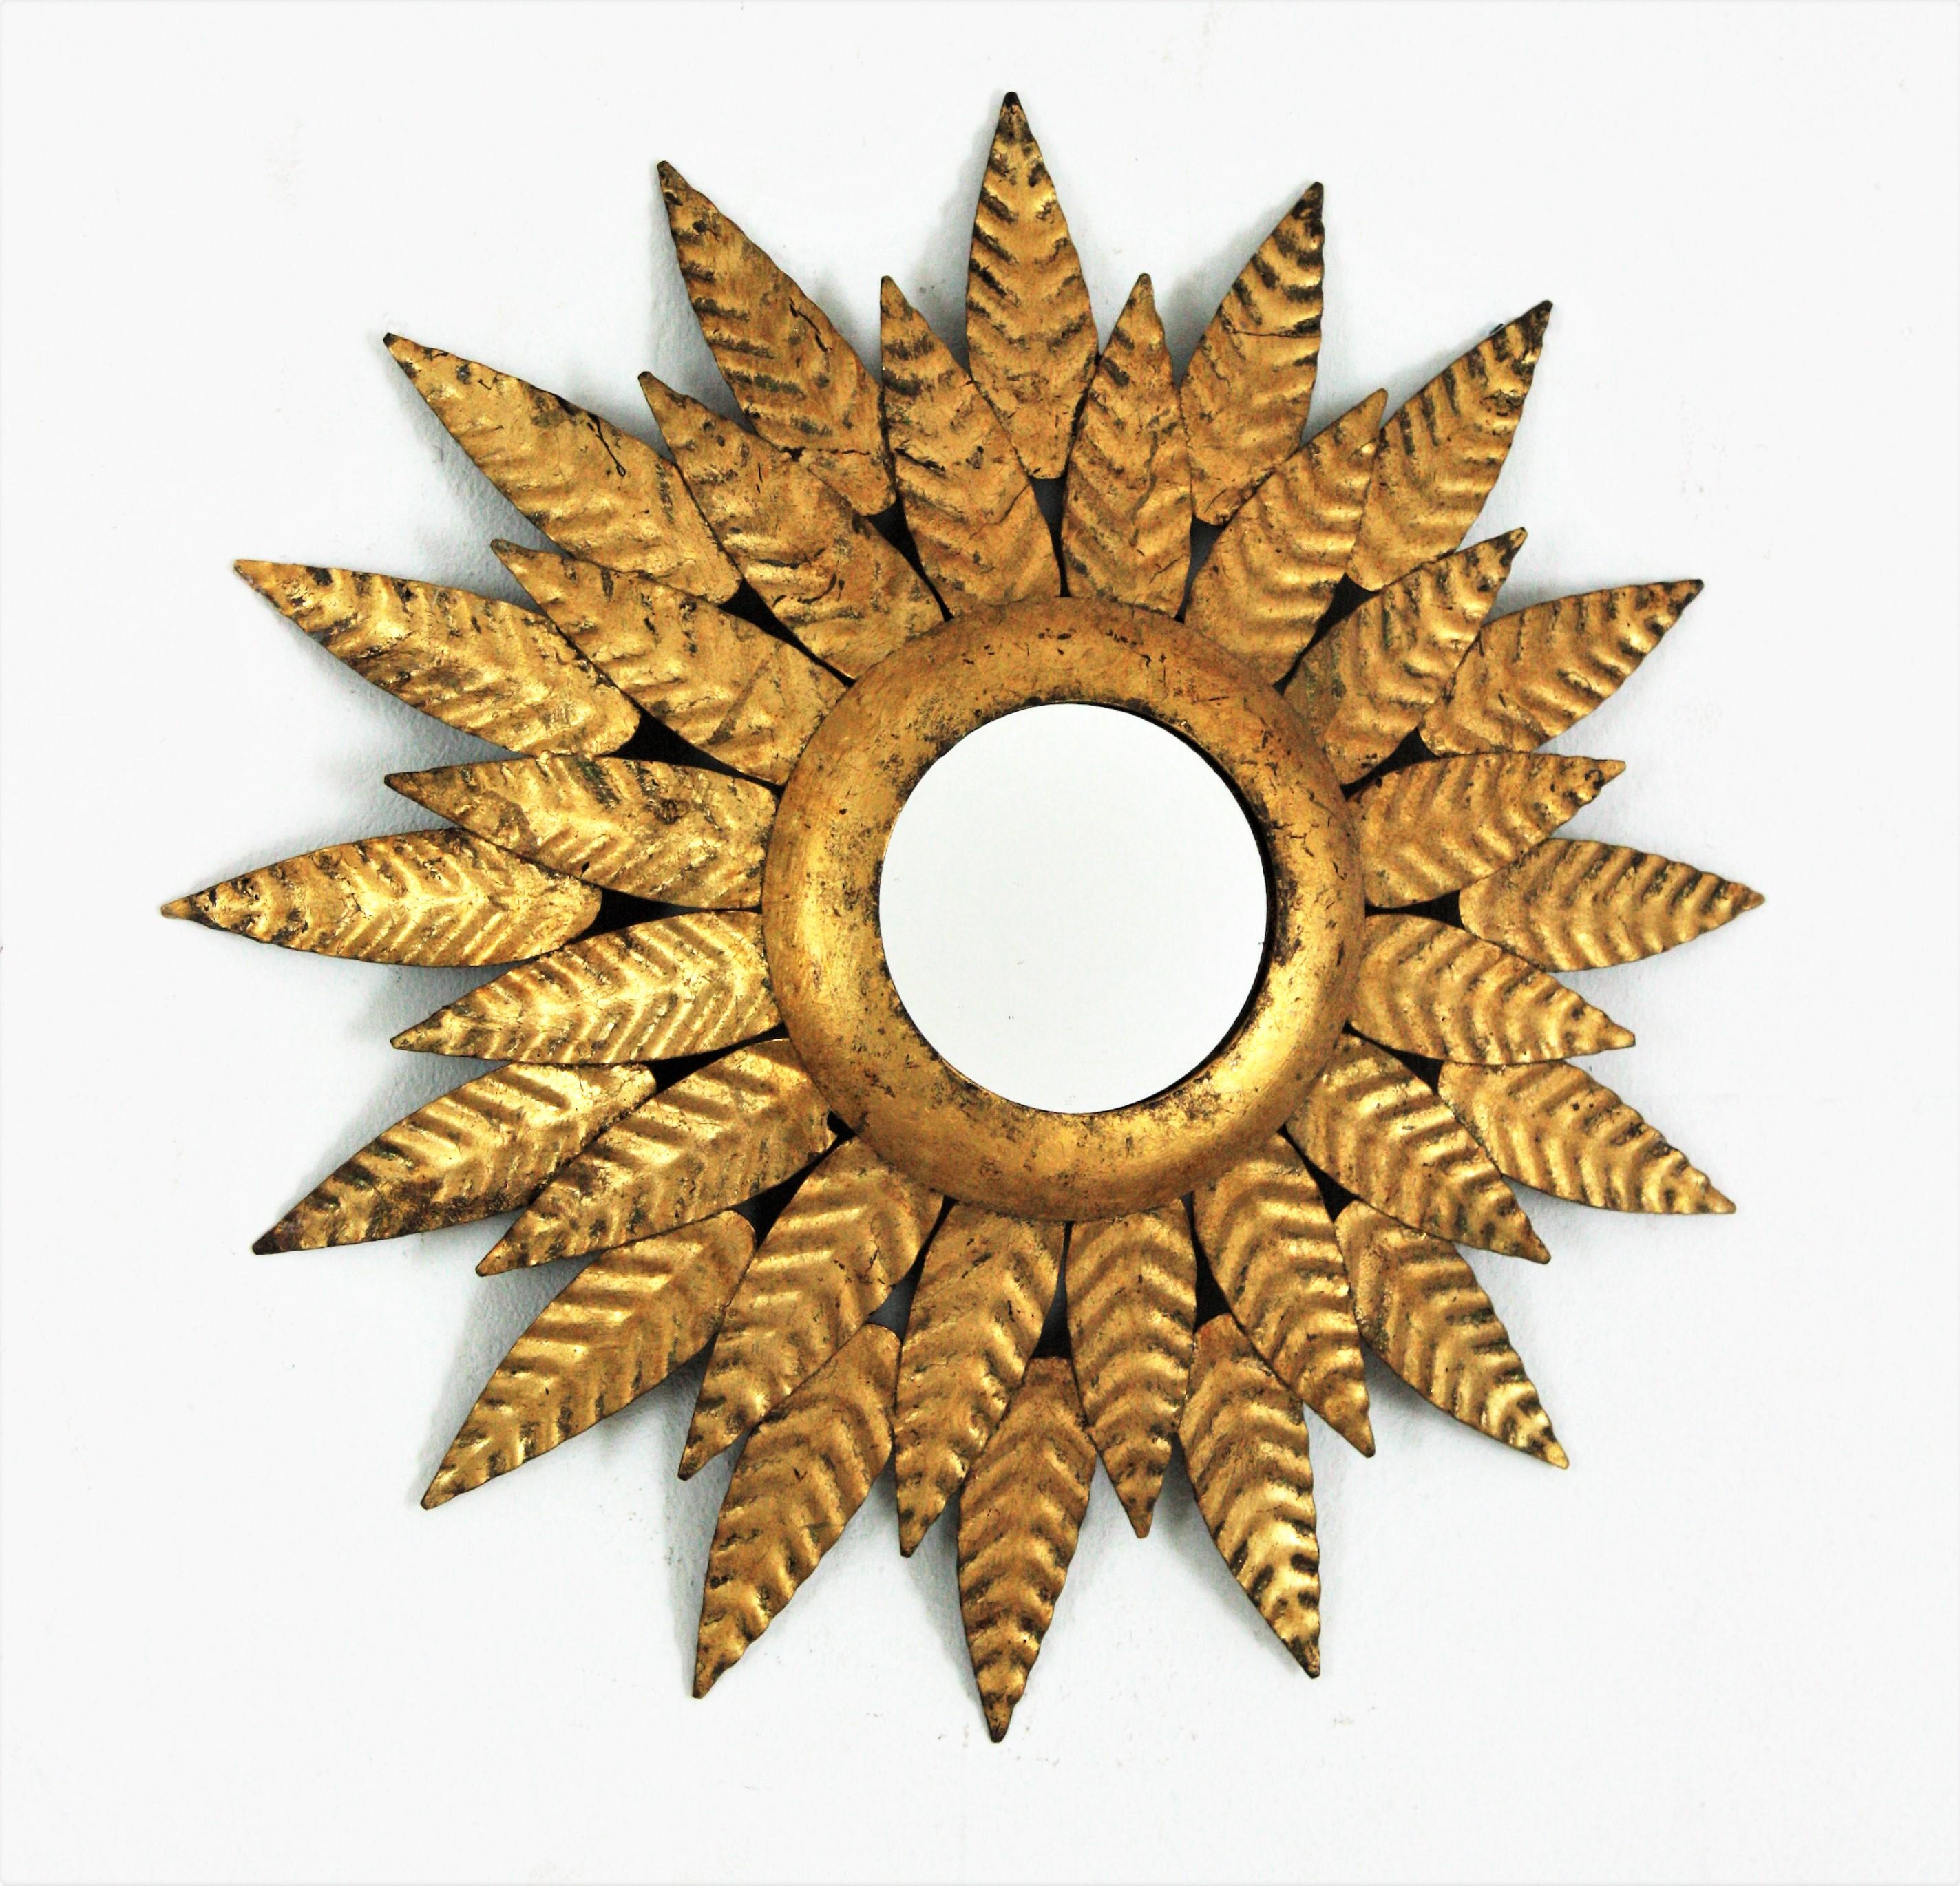 Mid-Century Modern double layered sunburst round wall mirror with gold leaf finish. Spain, 1950s.
Double layer of hand hammered leaves surrounding the central glass. Each leave is nicely adorned by the hammer work.
This highly decorative leafed